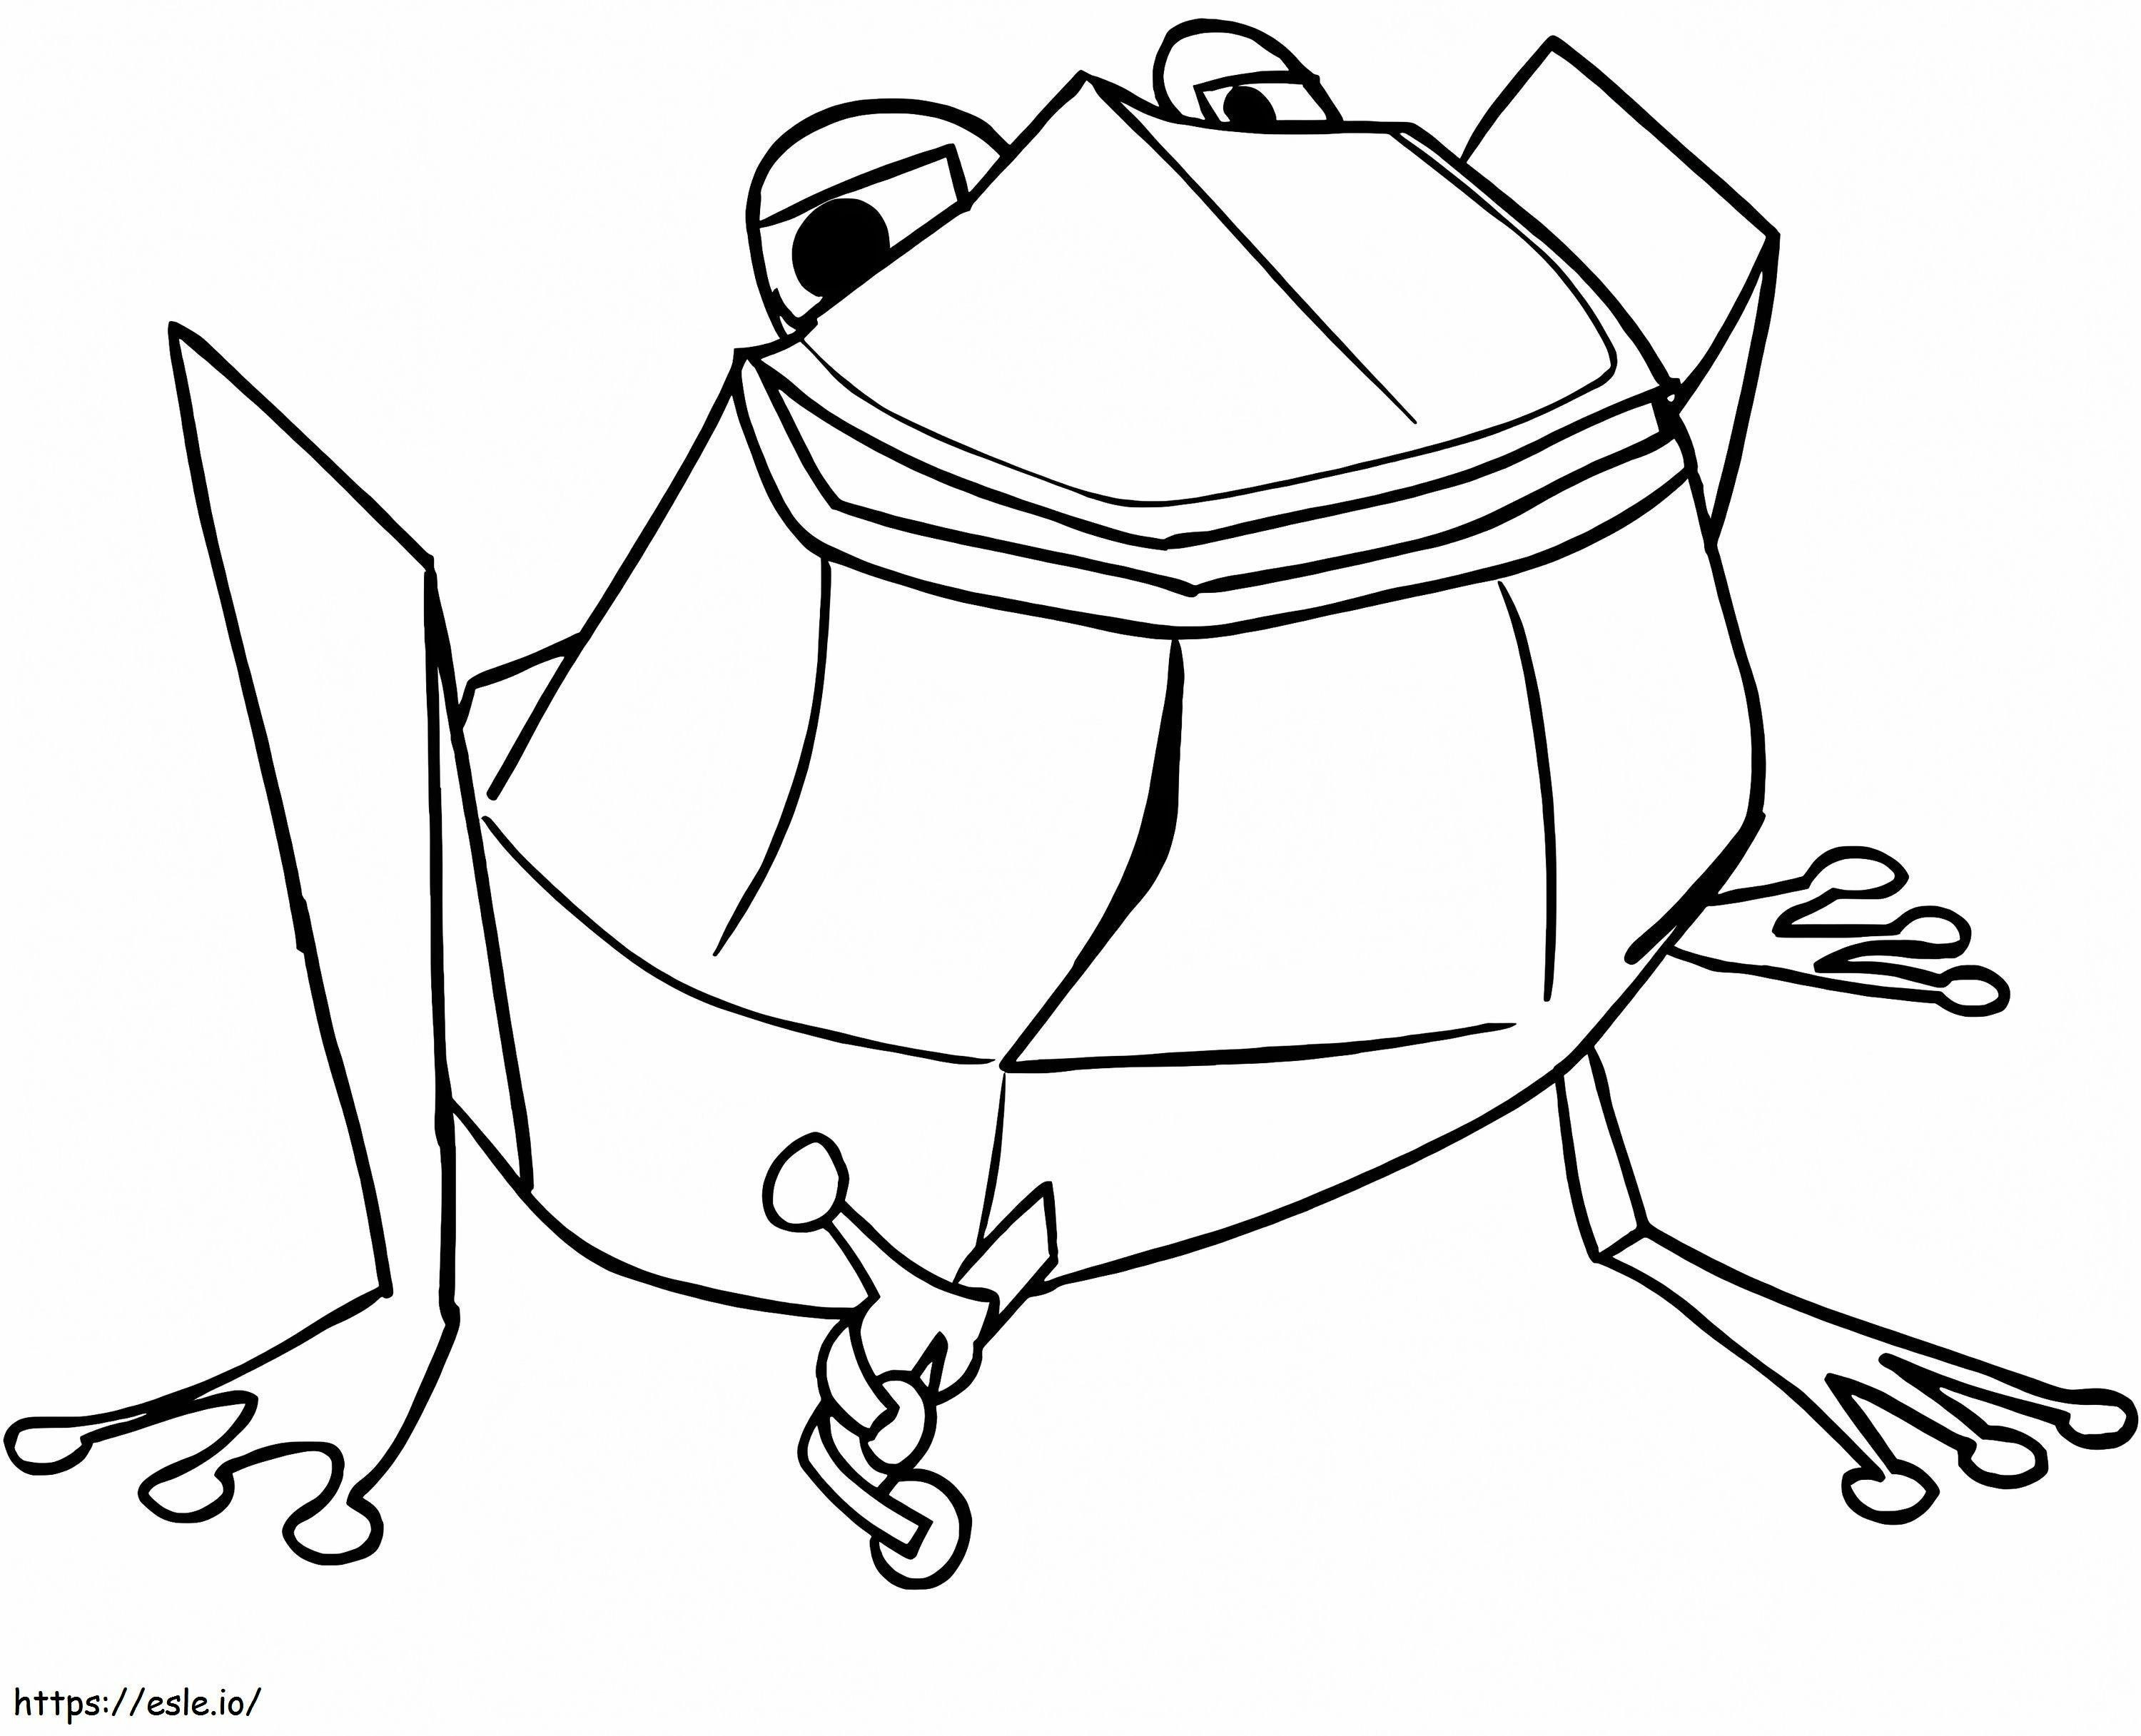 Belly Up In Zack And Quack coloring page